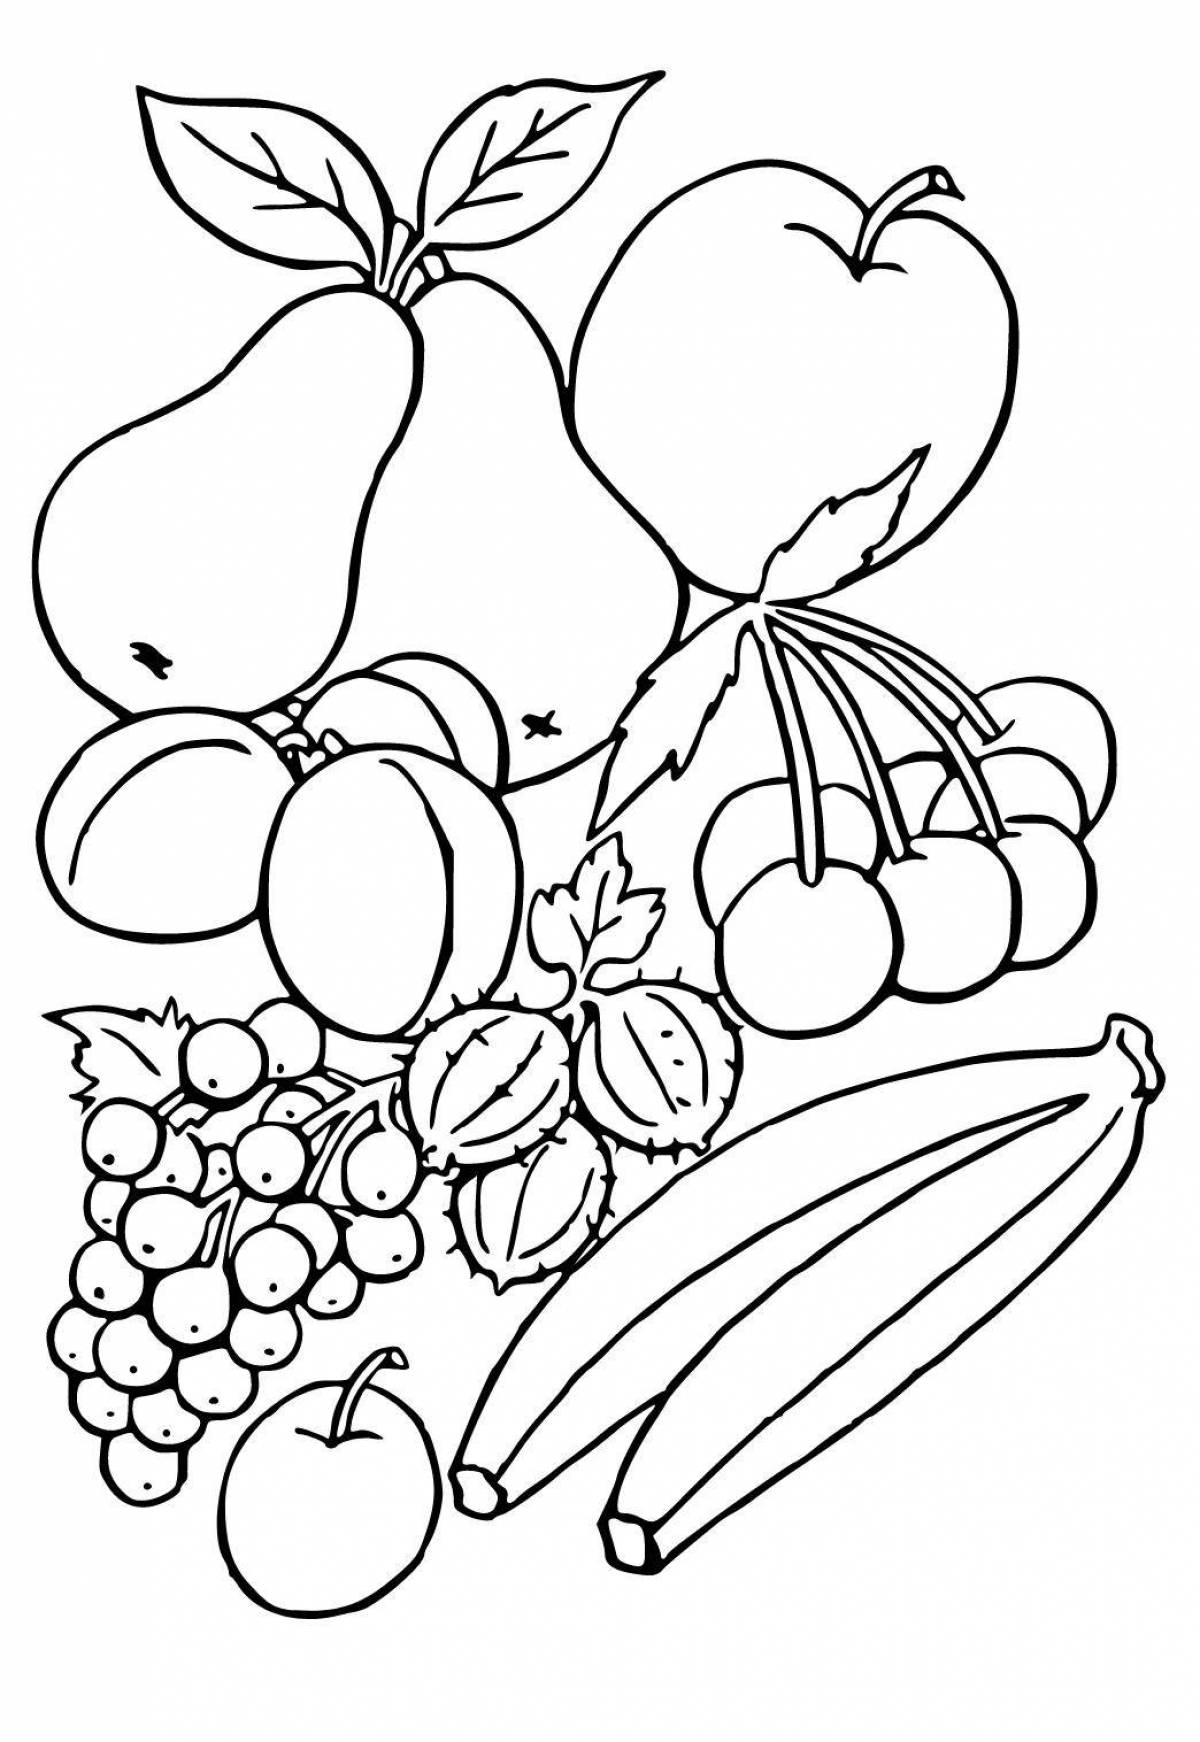 Great fruit and vegetable coloring book for girls